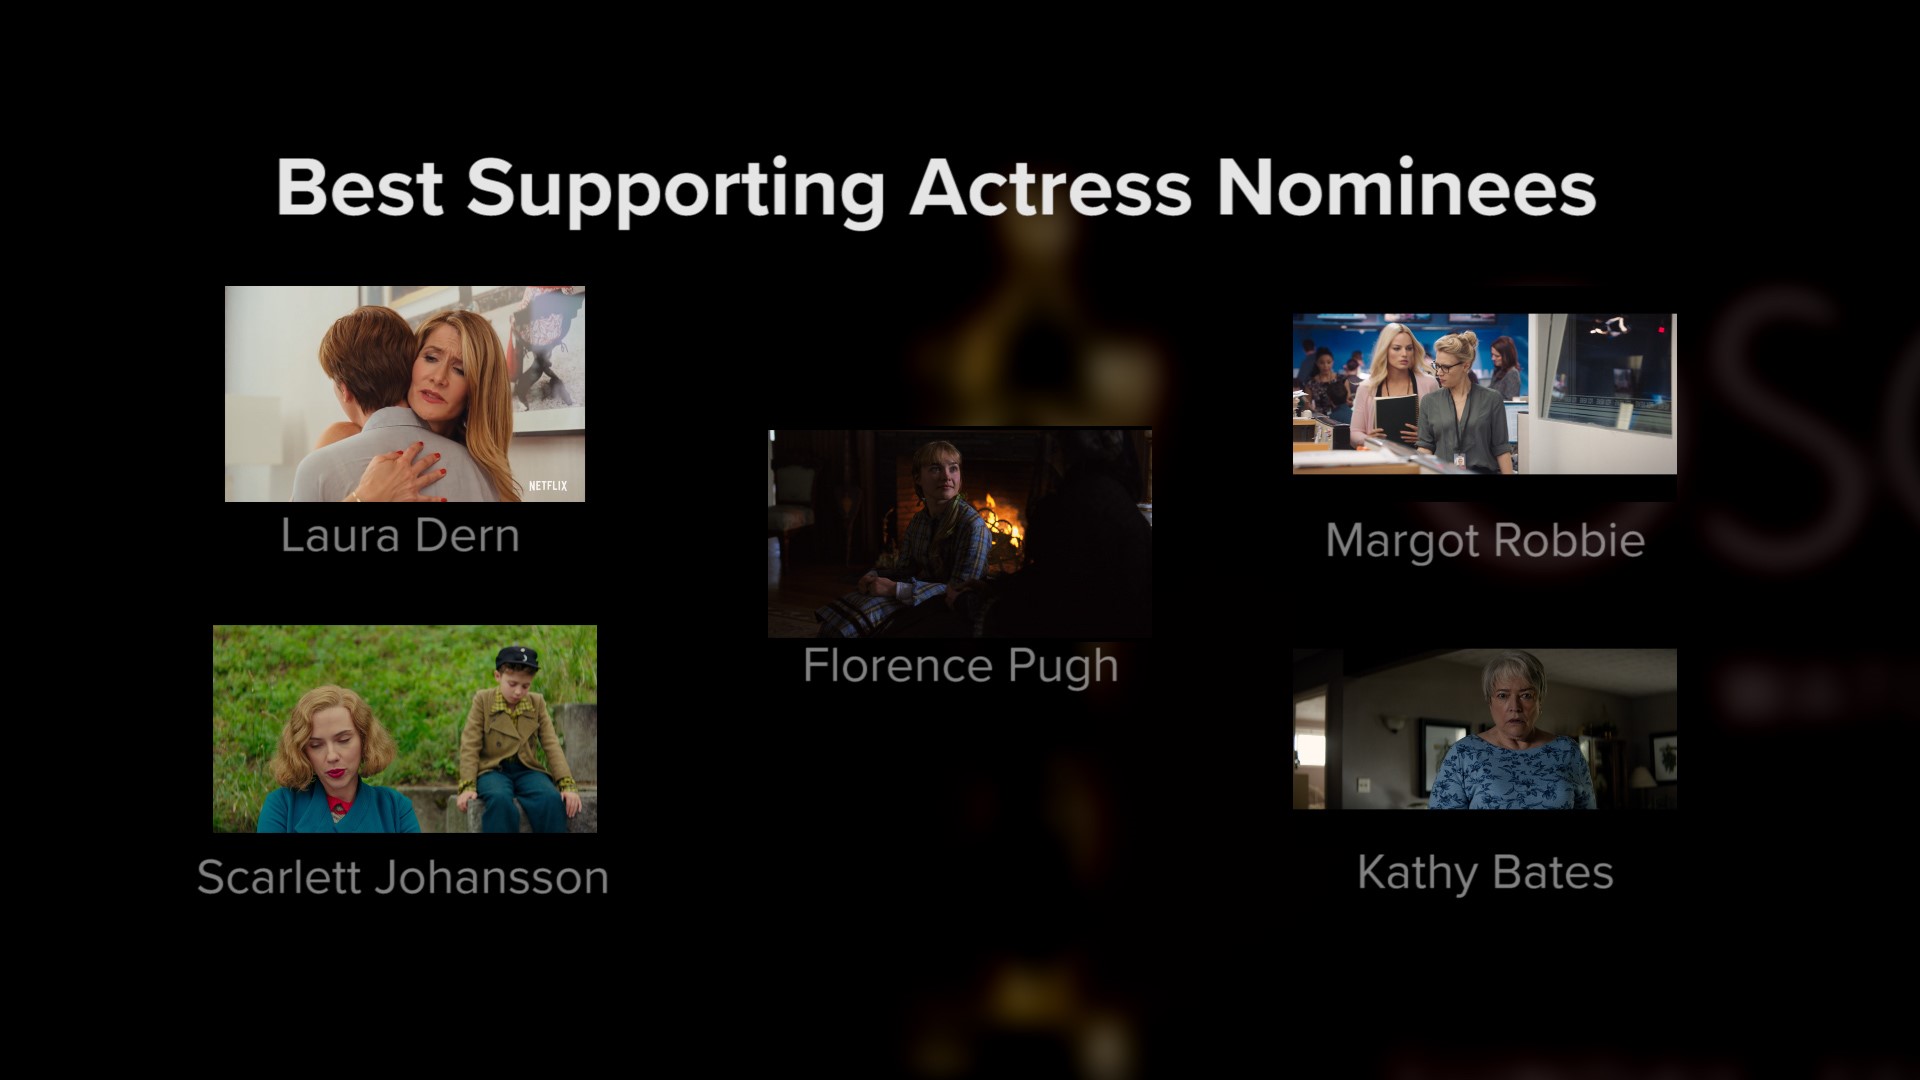 Who will win Best Supporting Actress at the 2020 Academy Awards? Mark S. Allen breaks down the Oscar odds for Laura Dern, Scarlett Johansson, Margot Robbie and more.